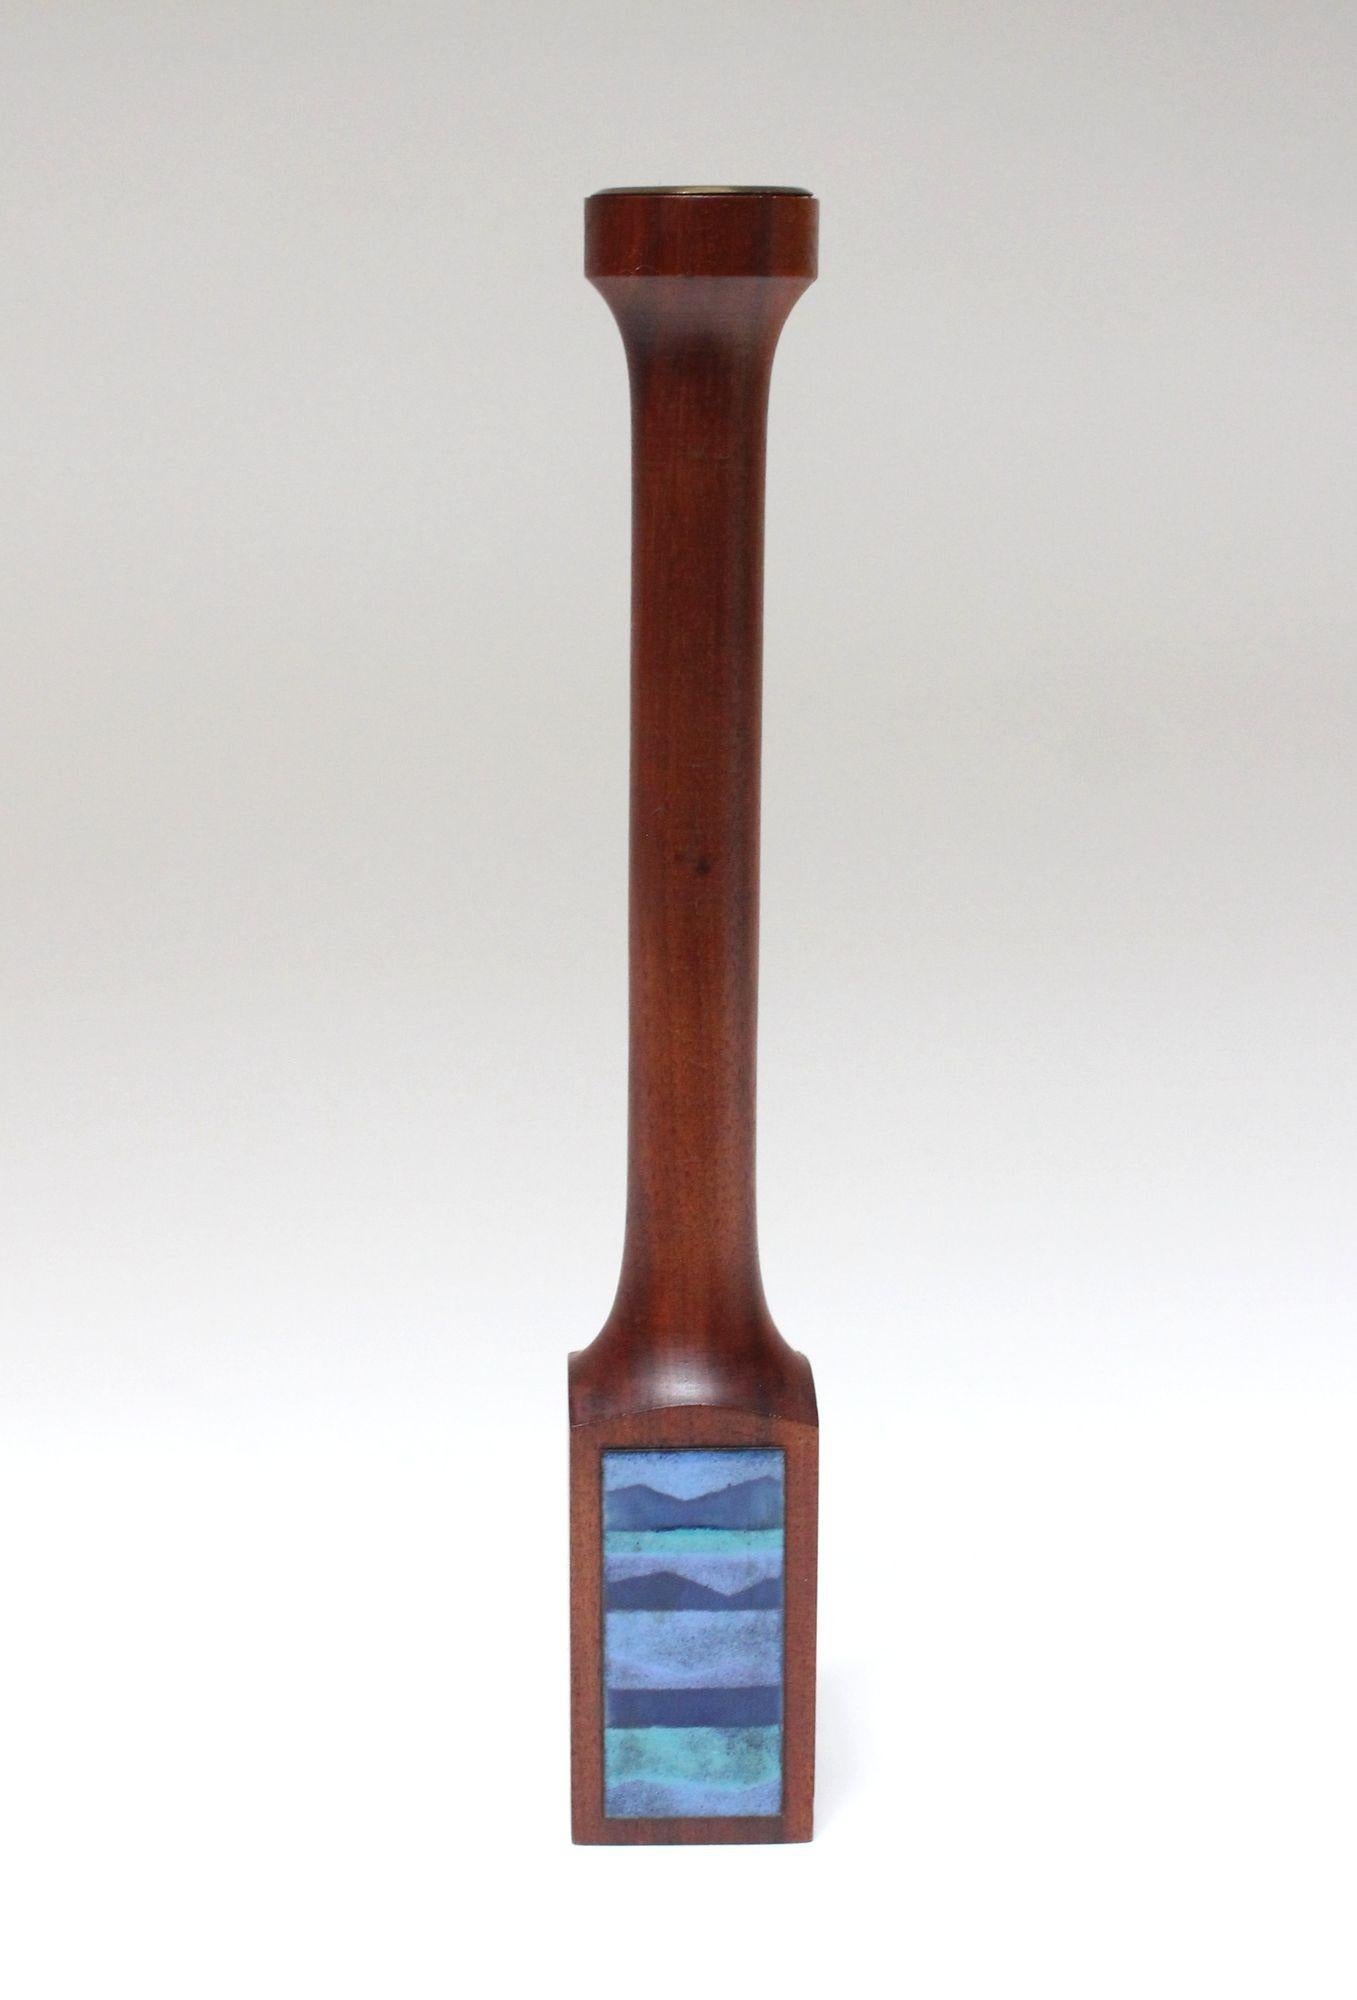 Large candlestick/votive holder by enamelist, Ernest Sohn, in solid, deeply sculpted walnut with enamel panel decoration (ca. 1960s, USA).
Enamel boasts beautiful blue and aqua tones contrasting nicely with the rich walnut tone and brass